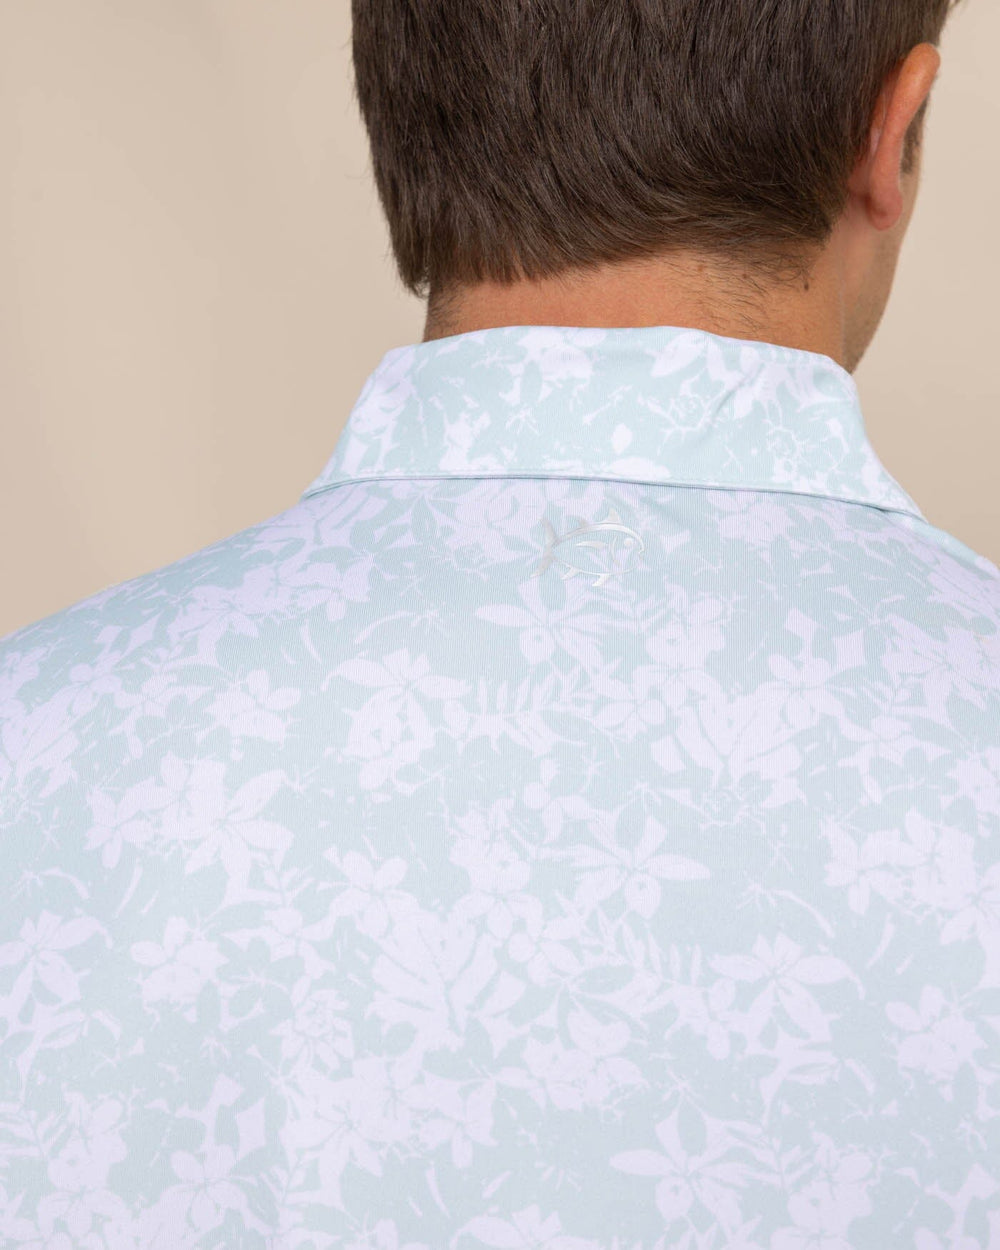 The detail view of the Southern Tide Driver Island Blooms Printed Polo by Southern Tide - Surf Spray Sage